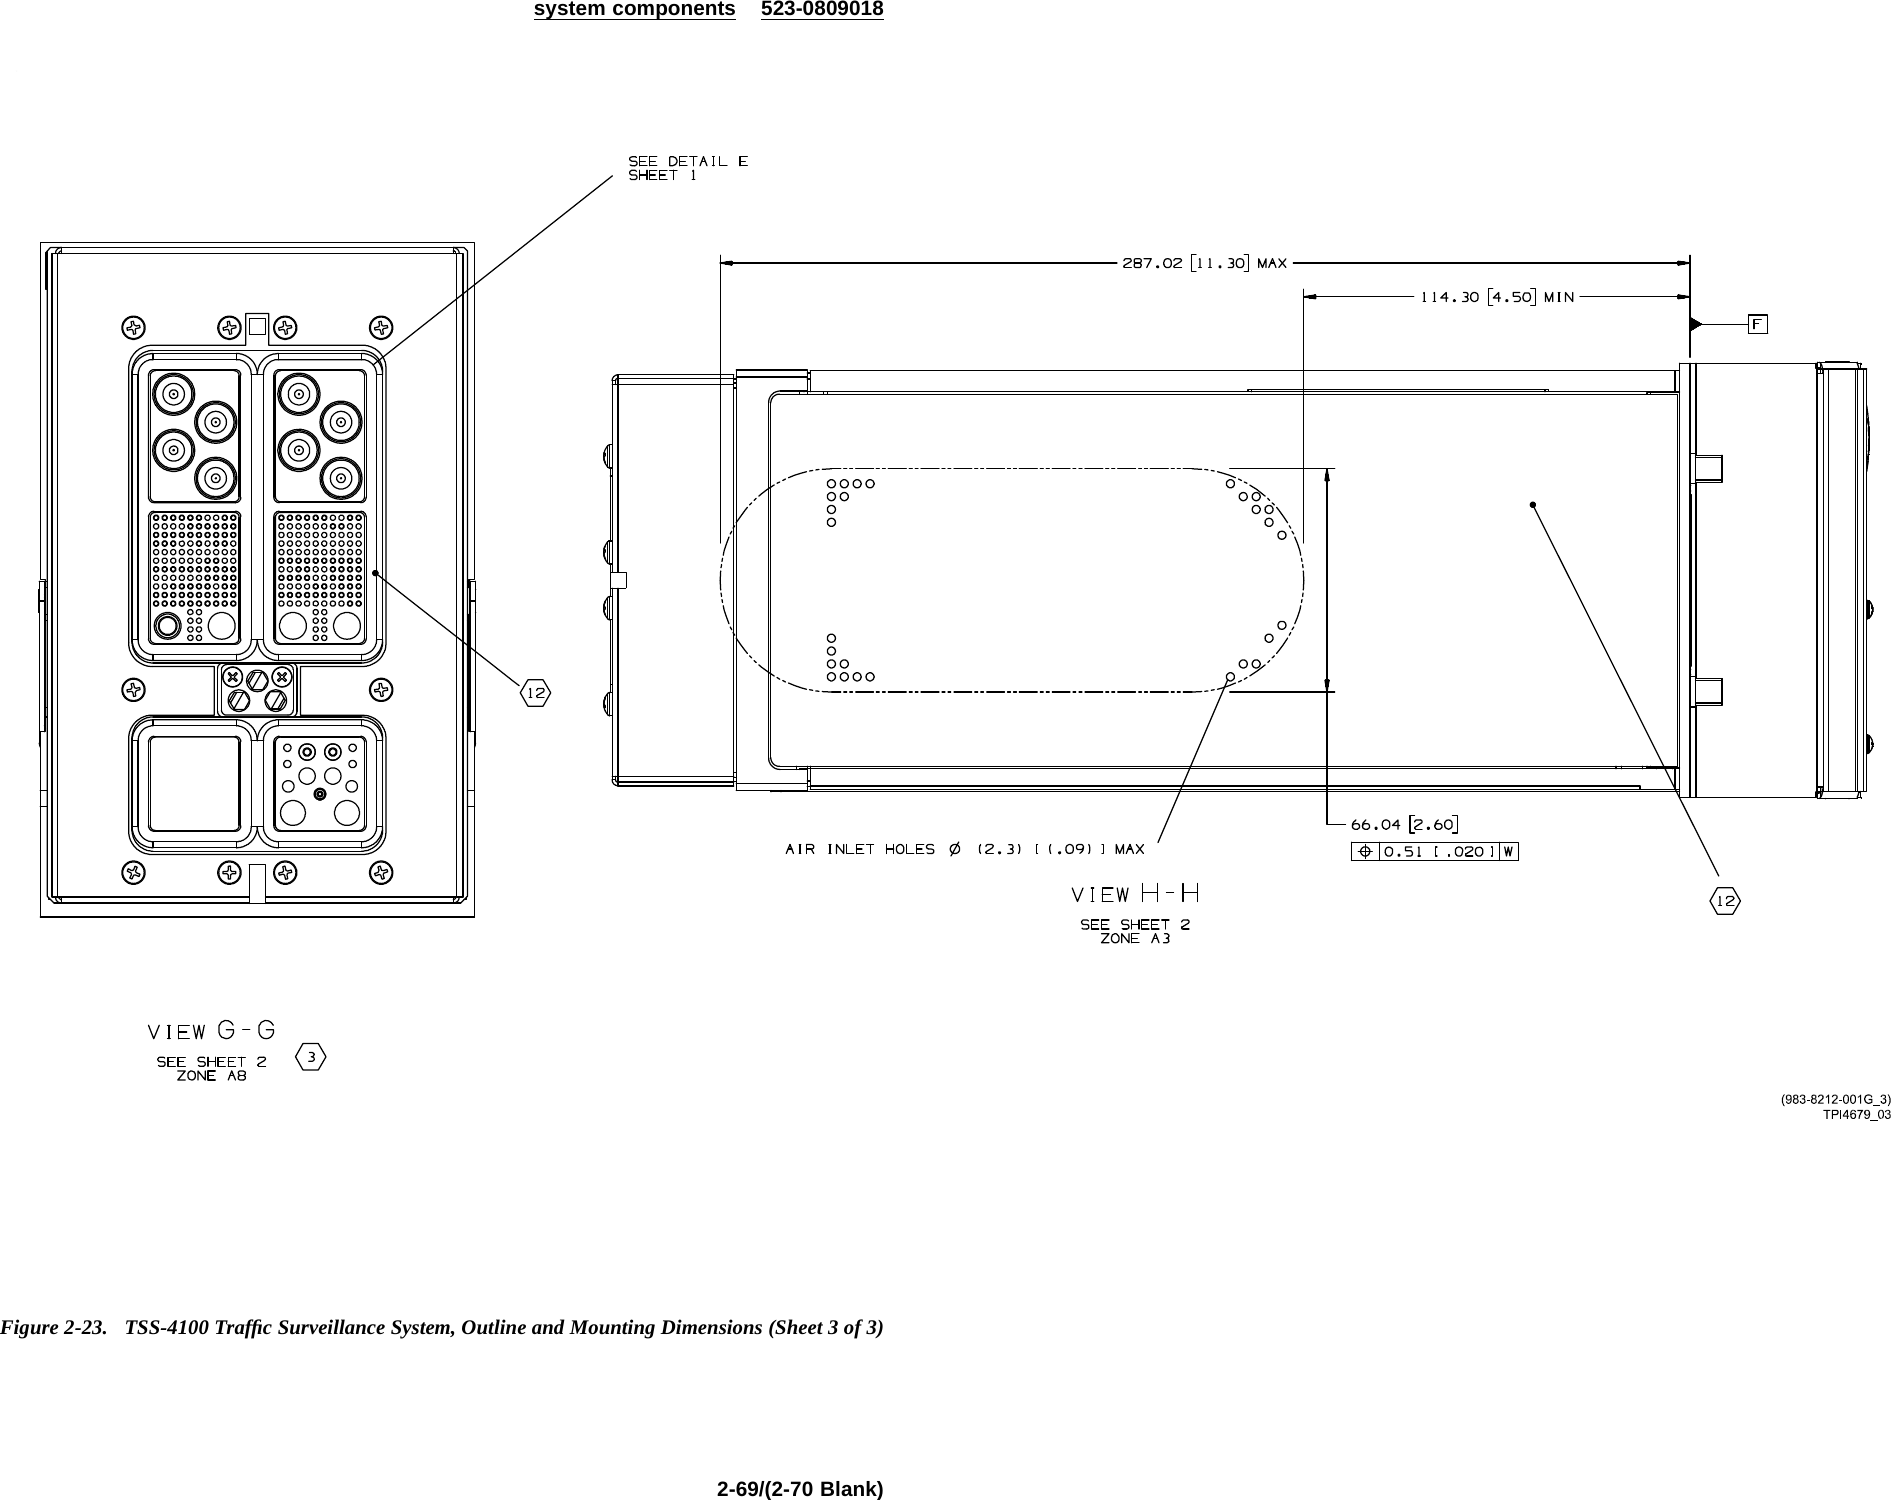 system components 523-0809018Figure 2-23. TSS-4100 Trafﬁc Surveillance System, Outline and Mounting Dimensions (Sheet 3 of 3)2-69/(2-70 Blank)